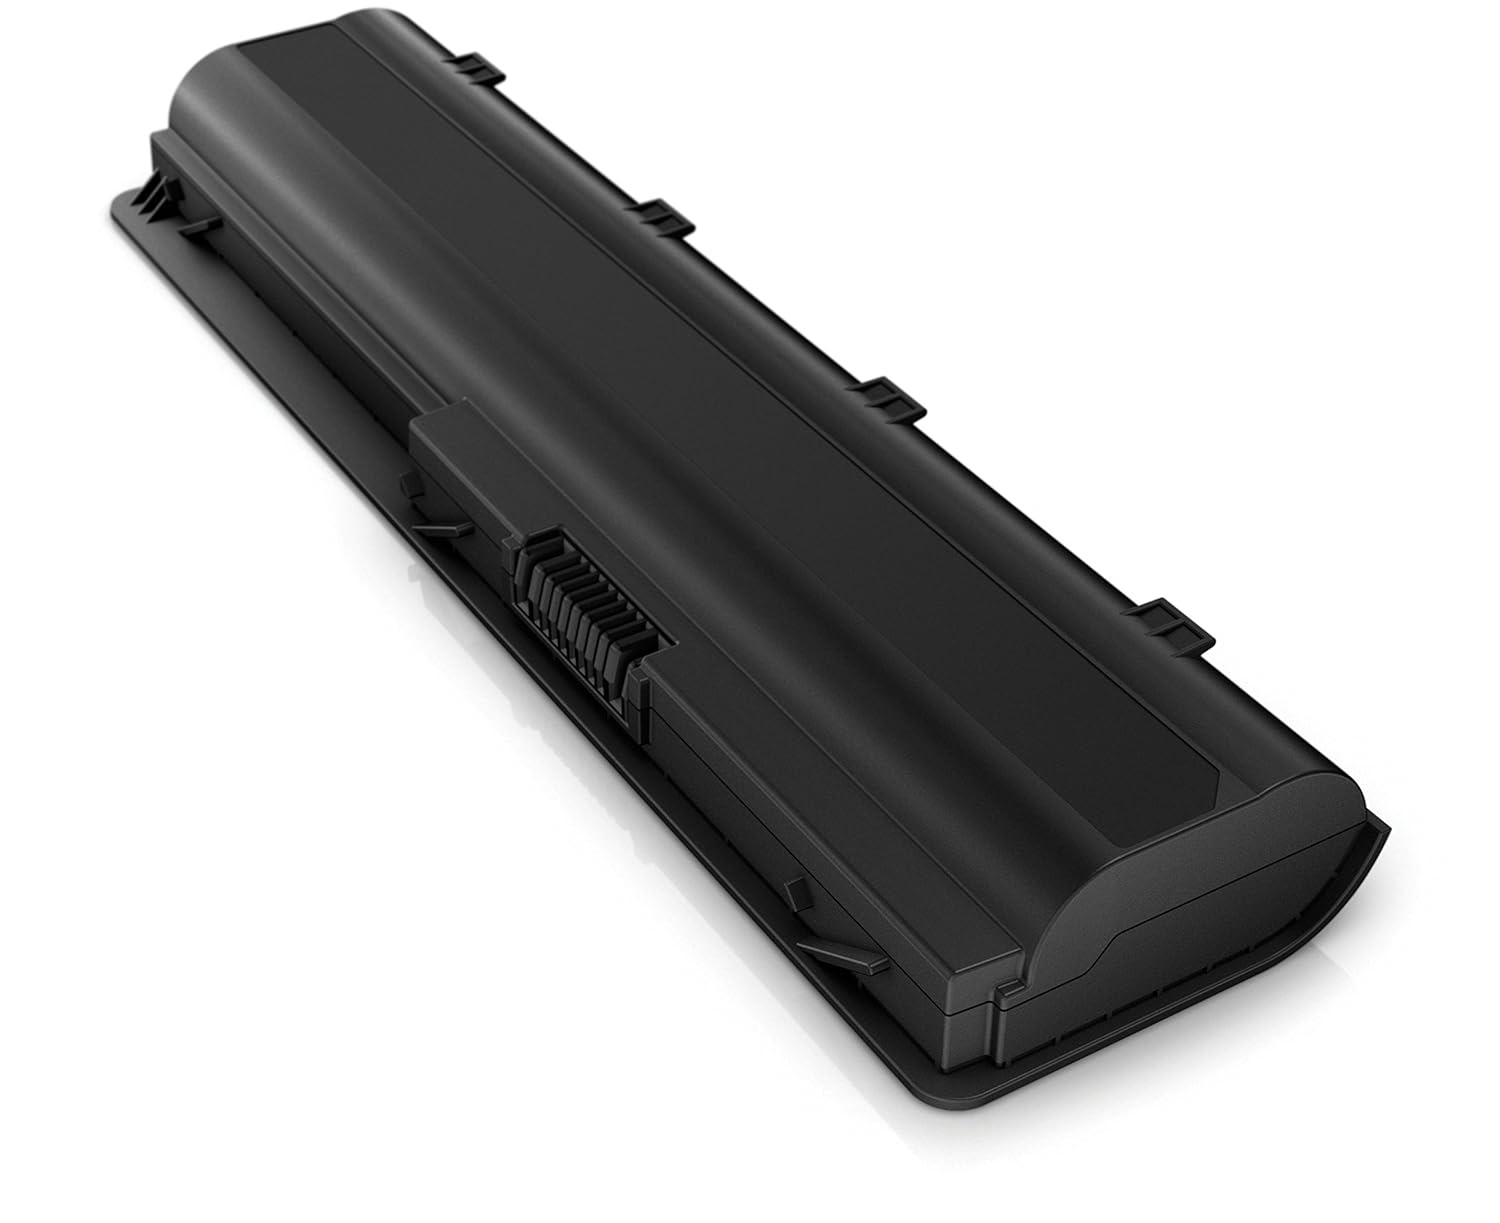 Refurbished Laptop Battery Existence – Fact Battery ...